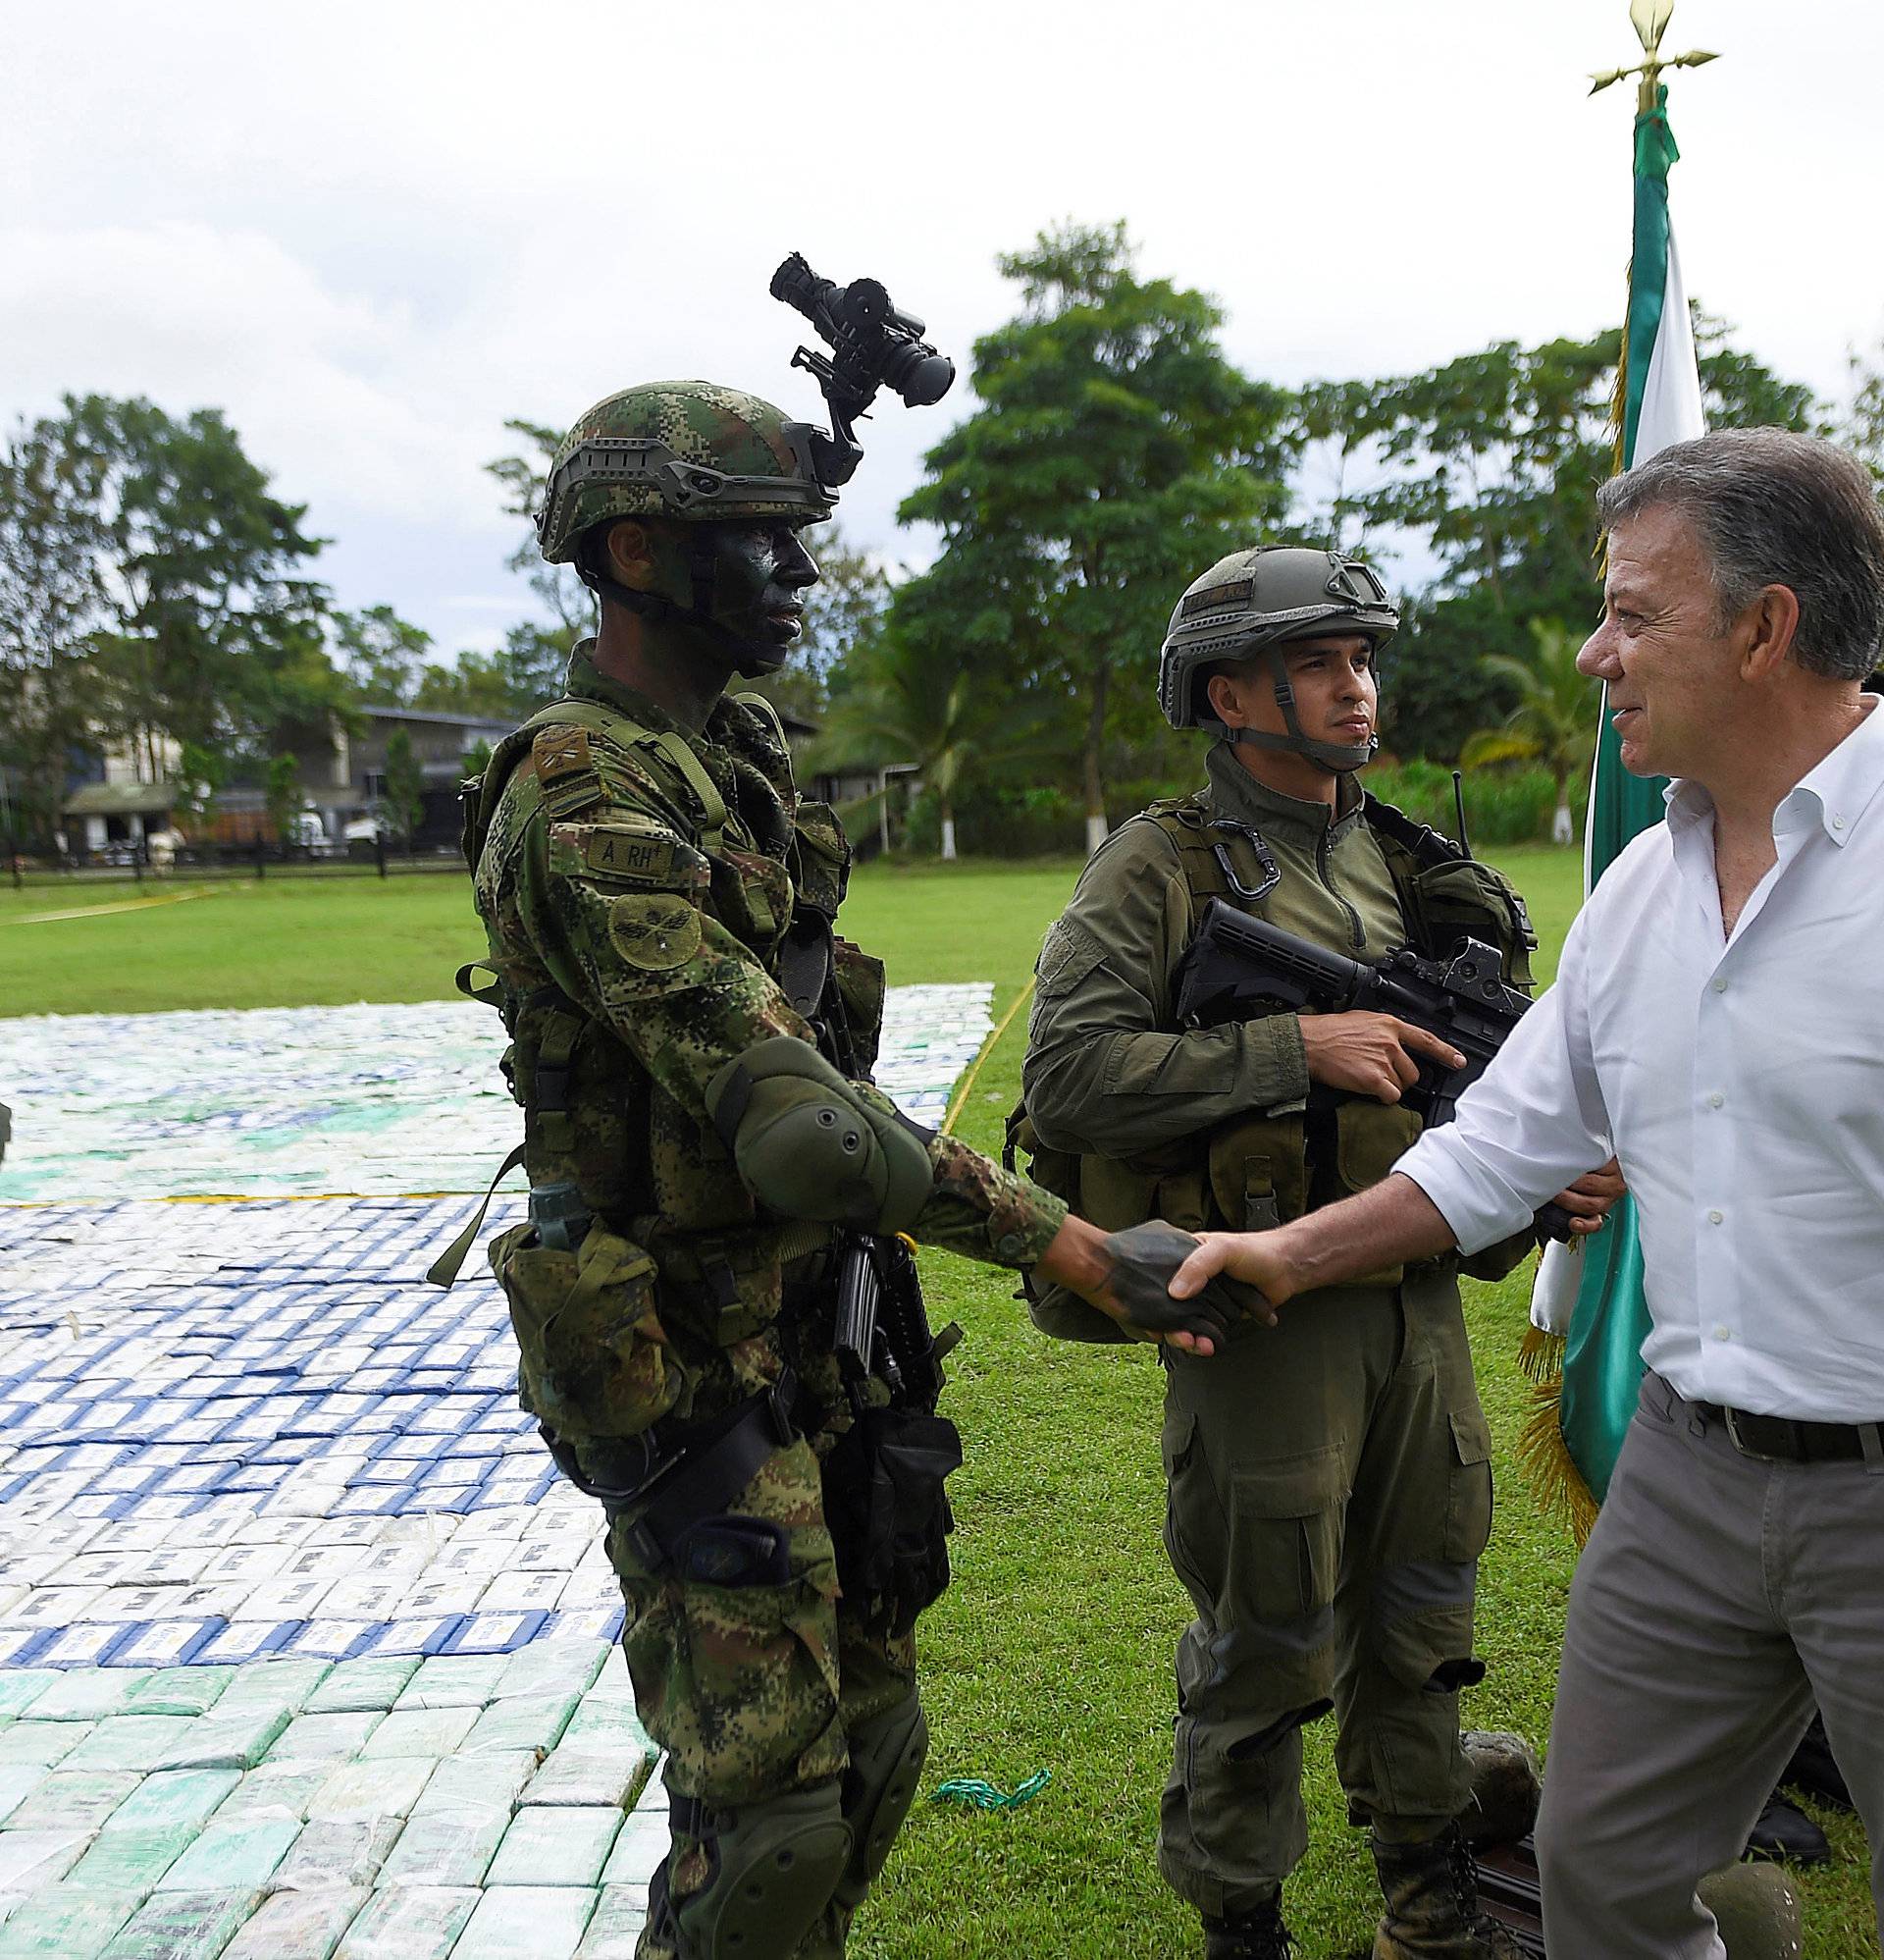 Colombia's President Juan Manuel Santos greets a soldier after the seizure of more than 12 tons of cocaine in Apartado